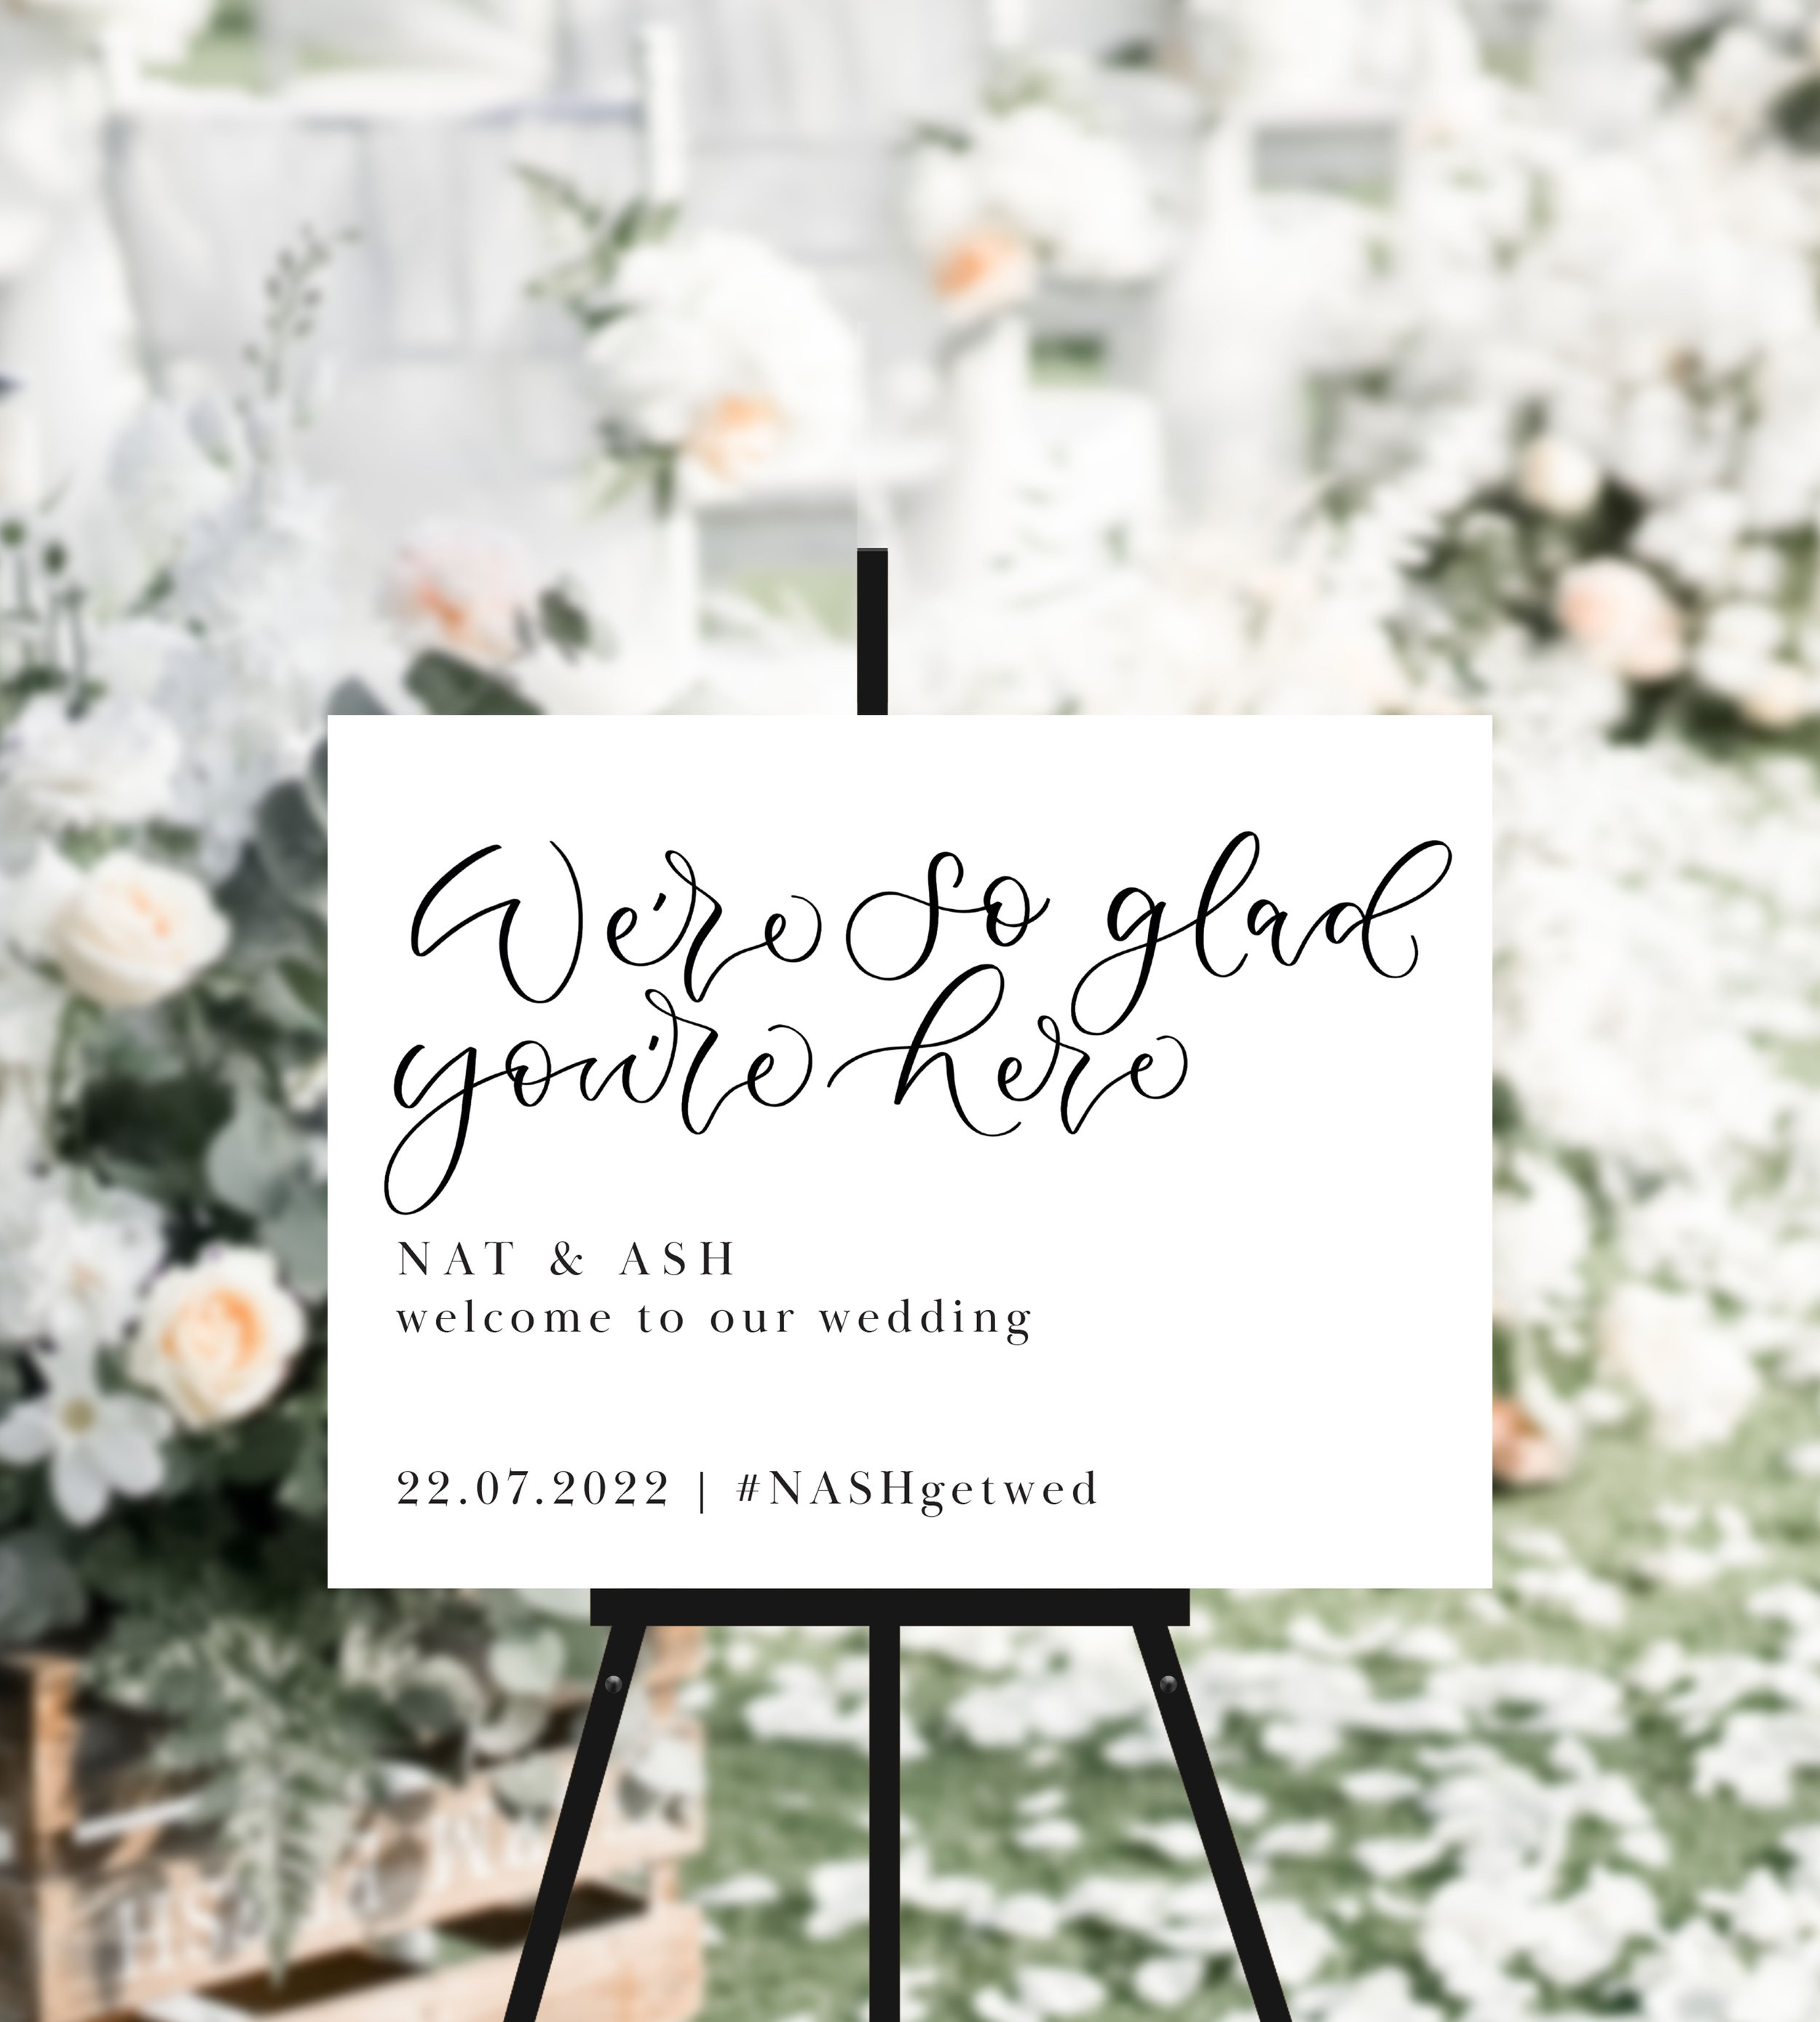 Were so glad youre here wedding sign - monochrome minimalist wedding welcome sign by the amyverse.jpg